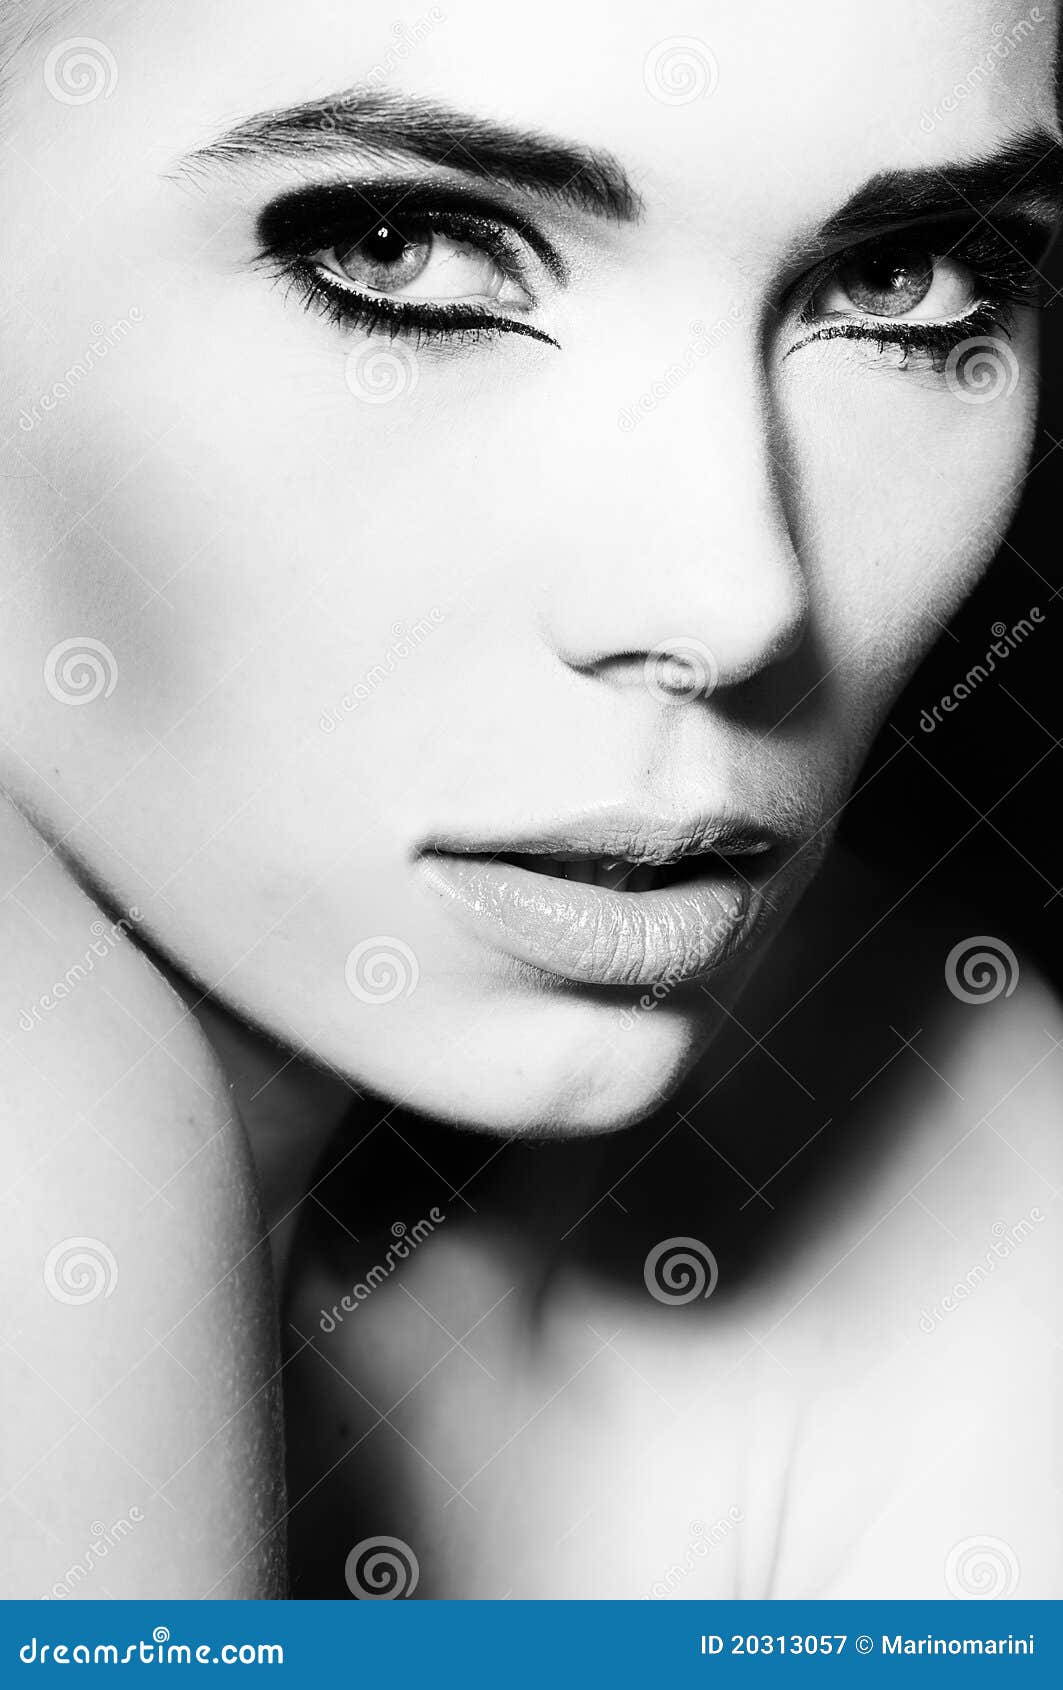 Women Face Royalty Free Stock Photography - Image: 20313057